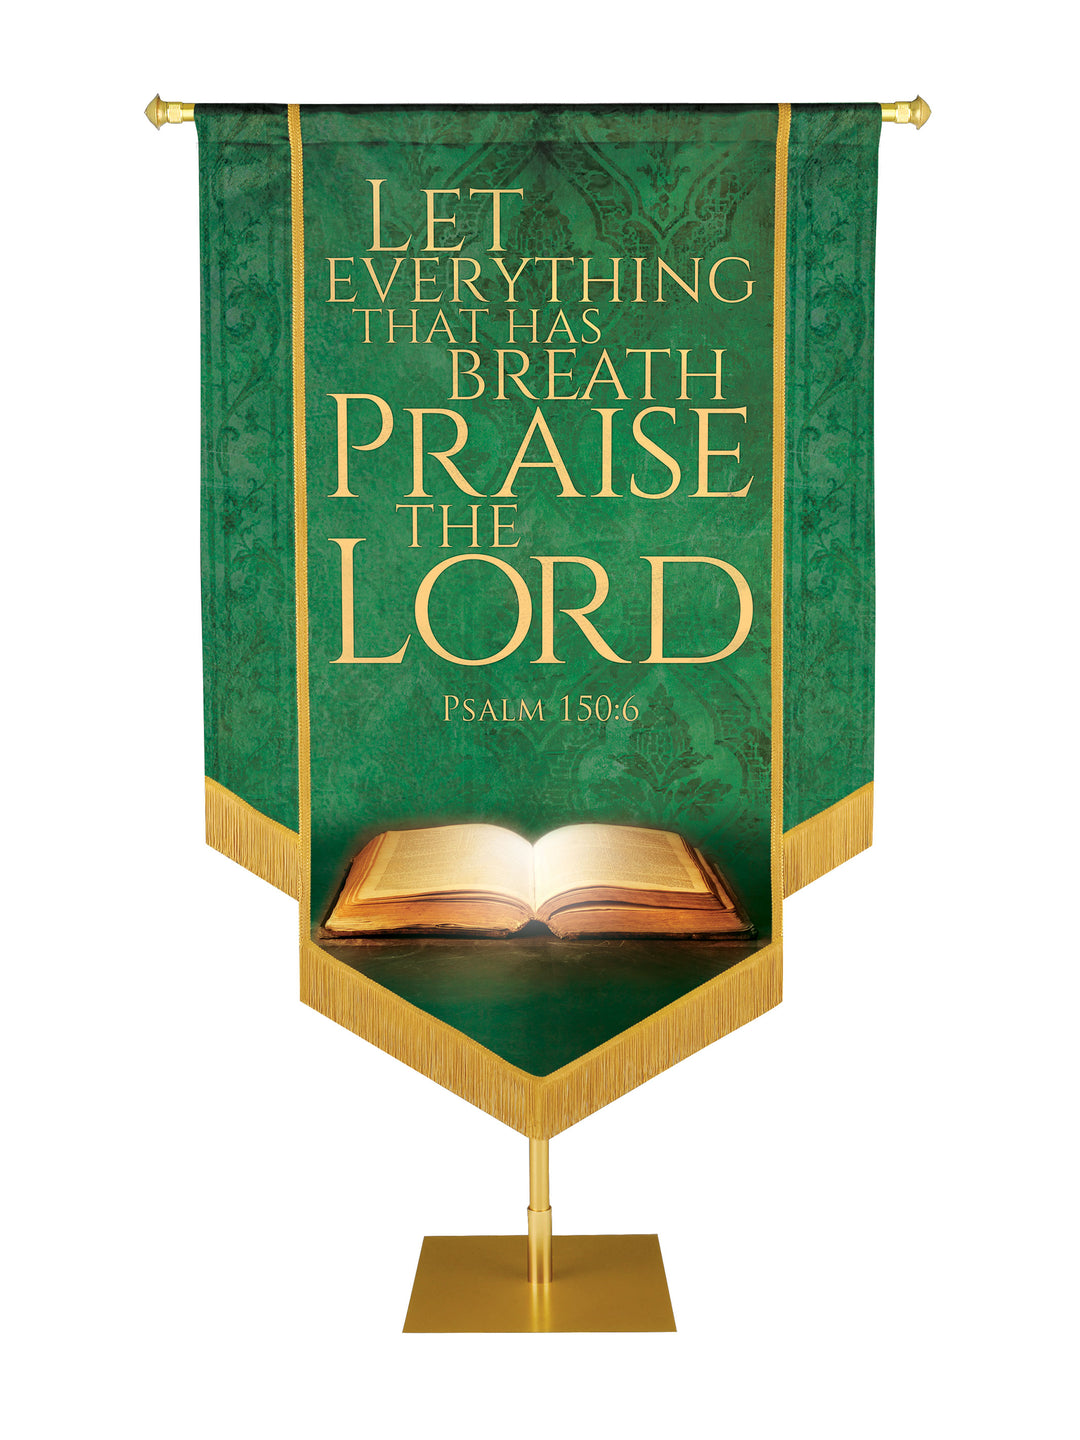 Holy Scriptures Praise the Lord Embellished Banner - Handcrafted Banners - PraiseBanners